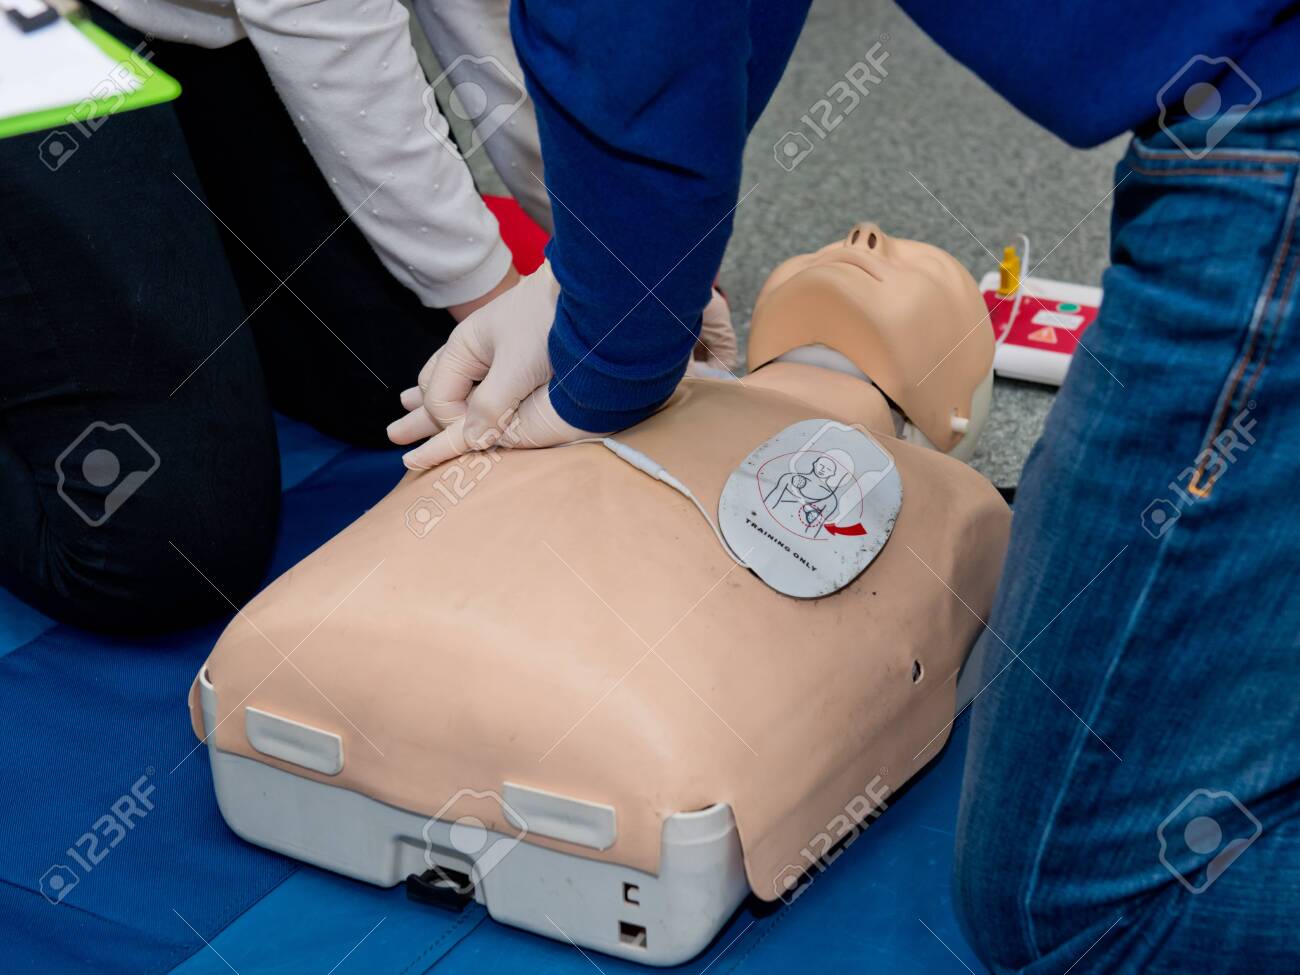 AED Training 101: How to Use an Automated External Defibrillator